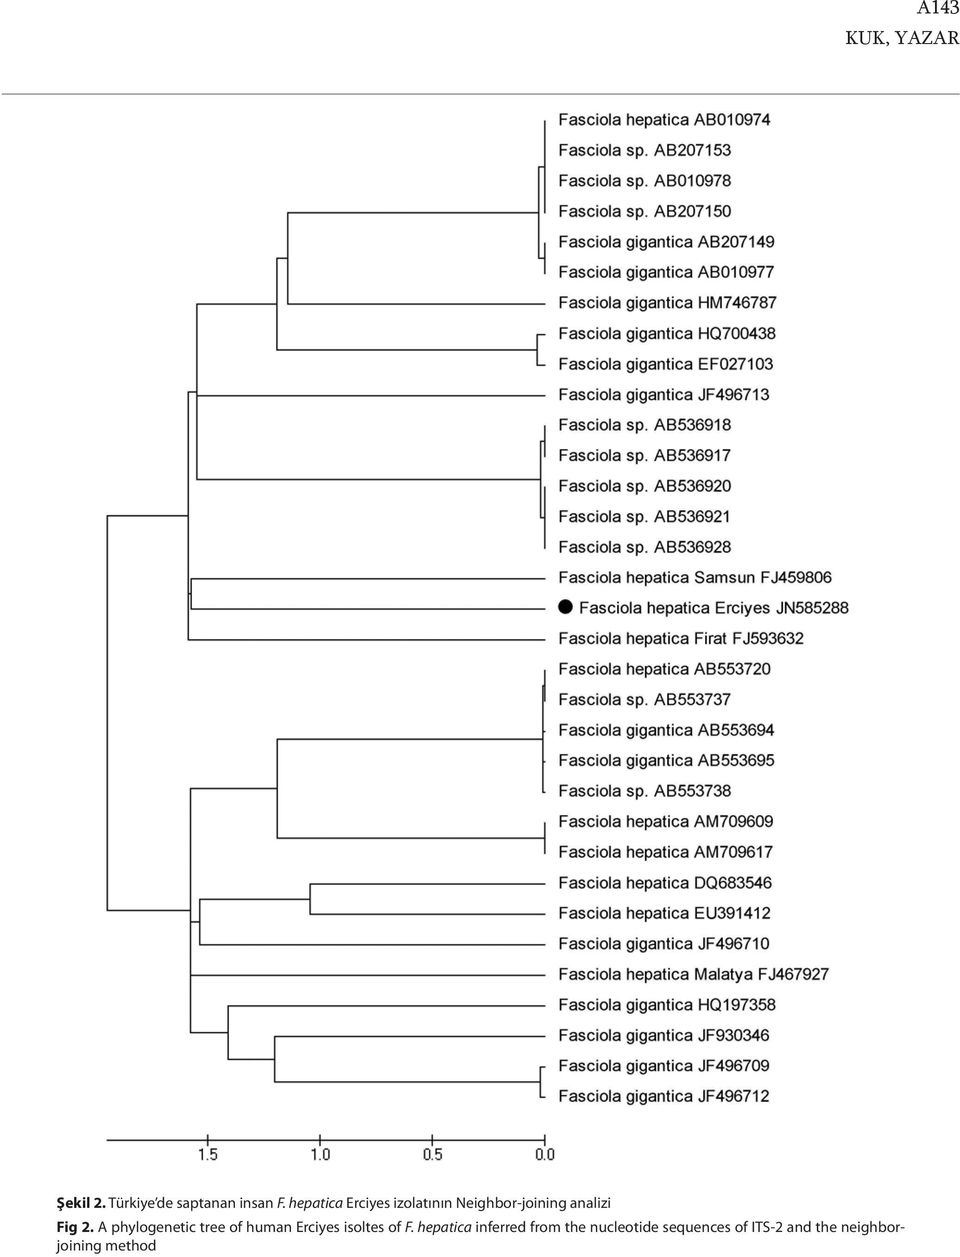 A phylogenetic tree of human Erciyes isoltes of F.